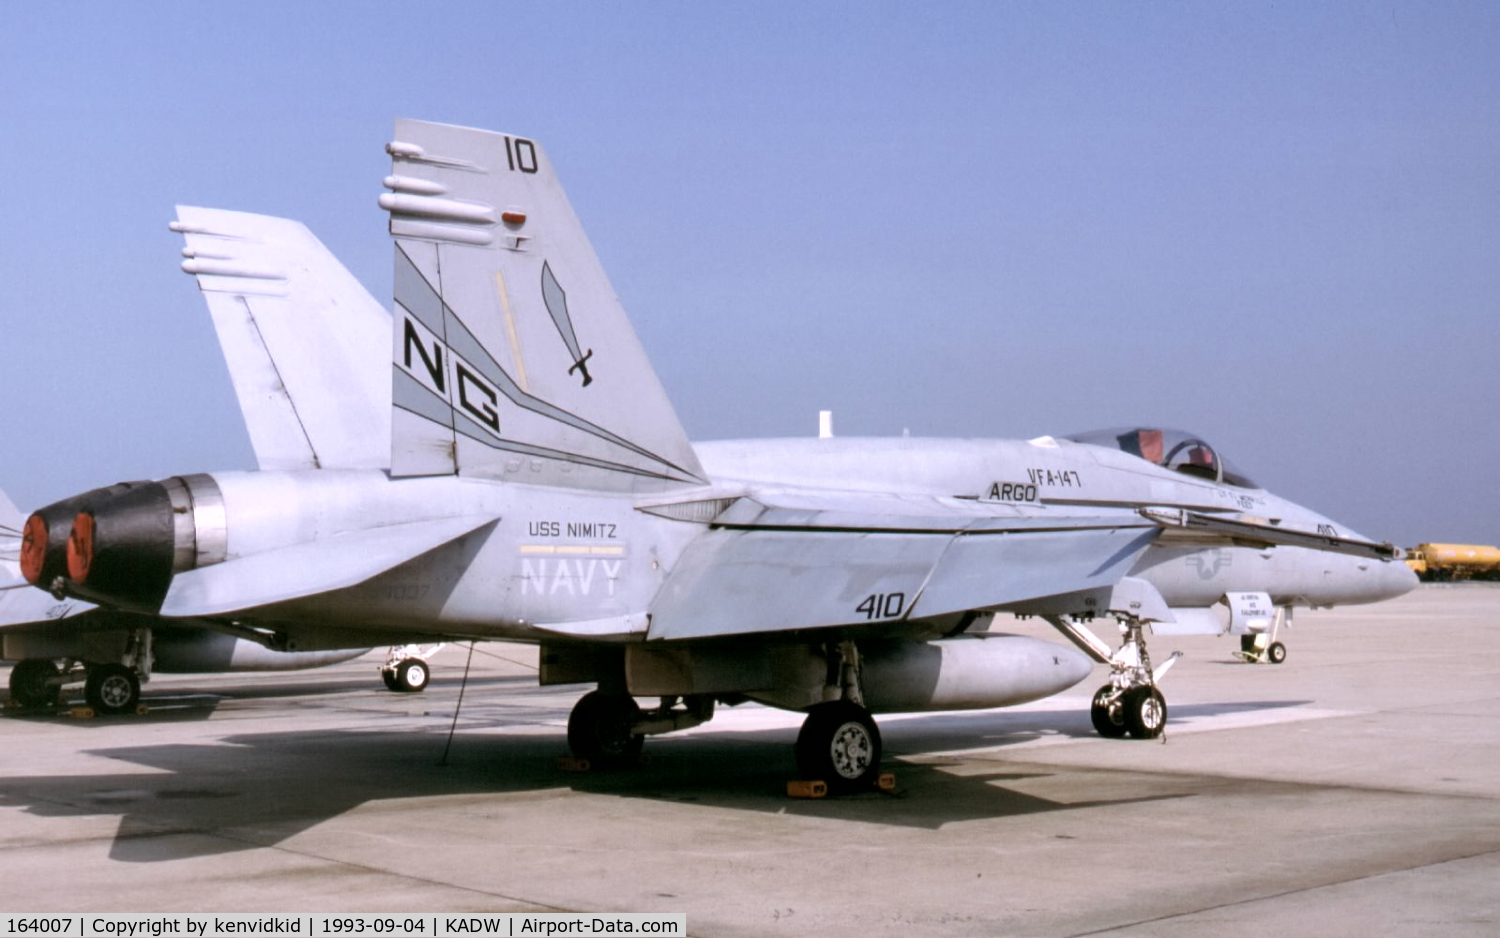 164007, 1989 McDonnell Douglas F/A-18C Hornet C/N 0889/C153, Andrew's Air Force base visiting aircraft ramp.